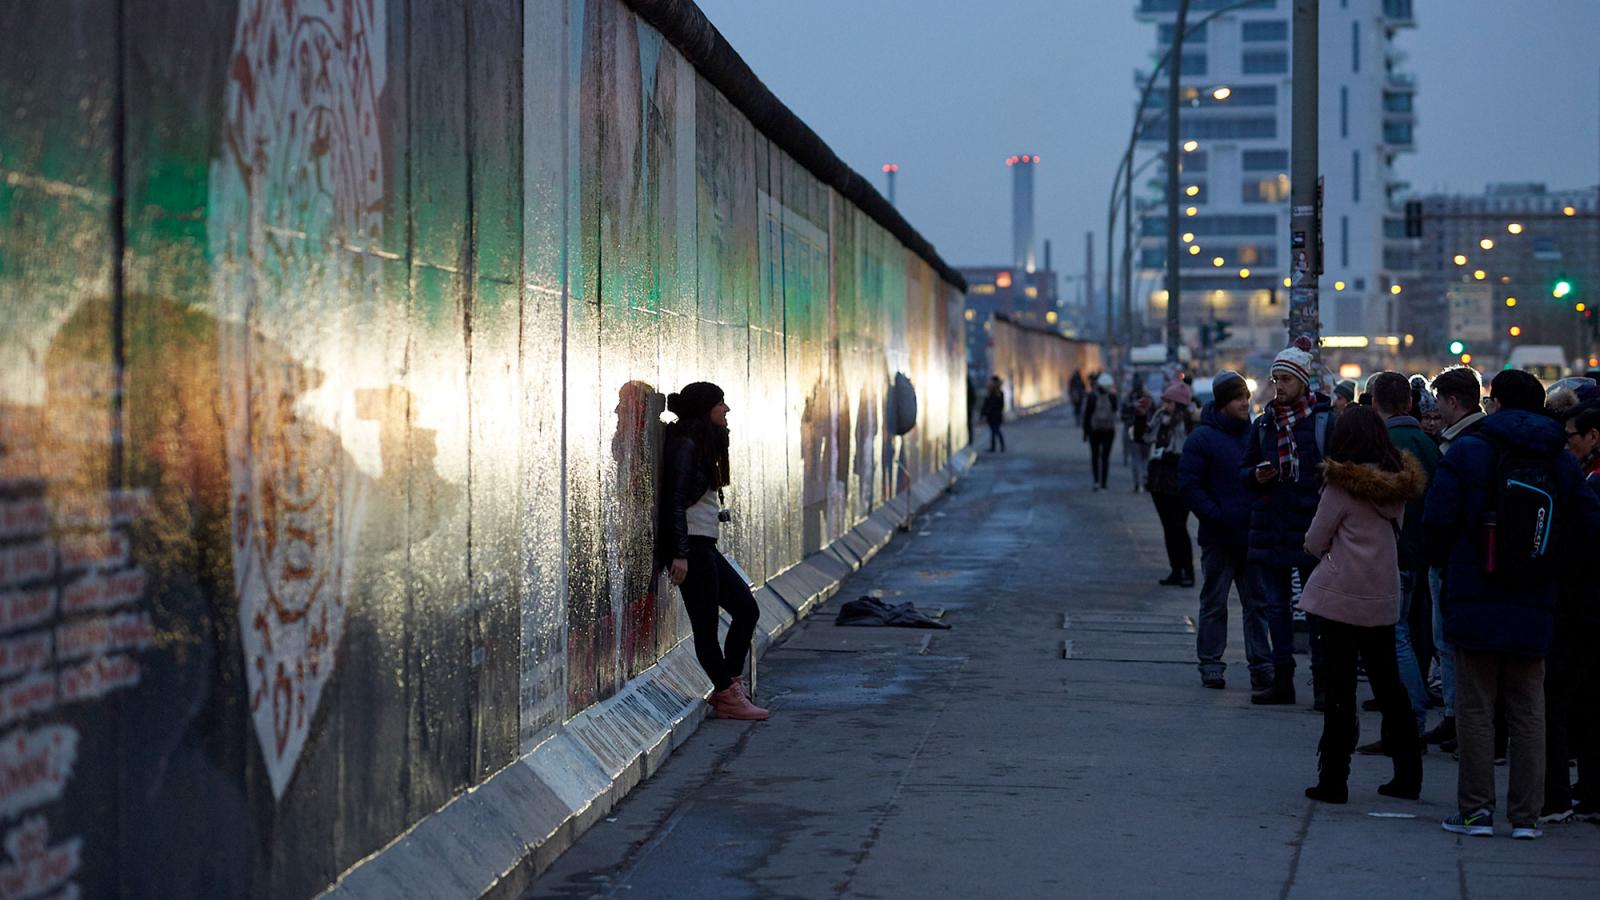 the East Side Gallery in the evening